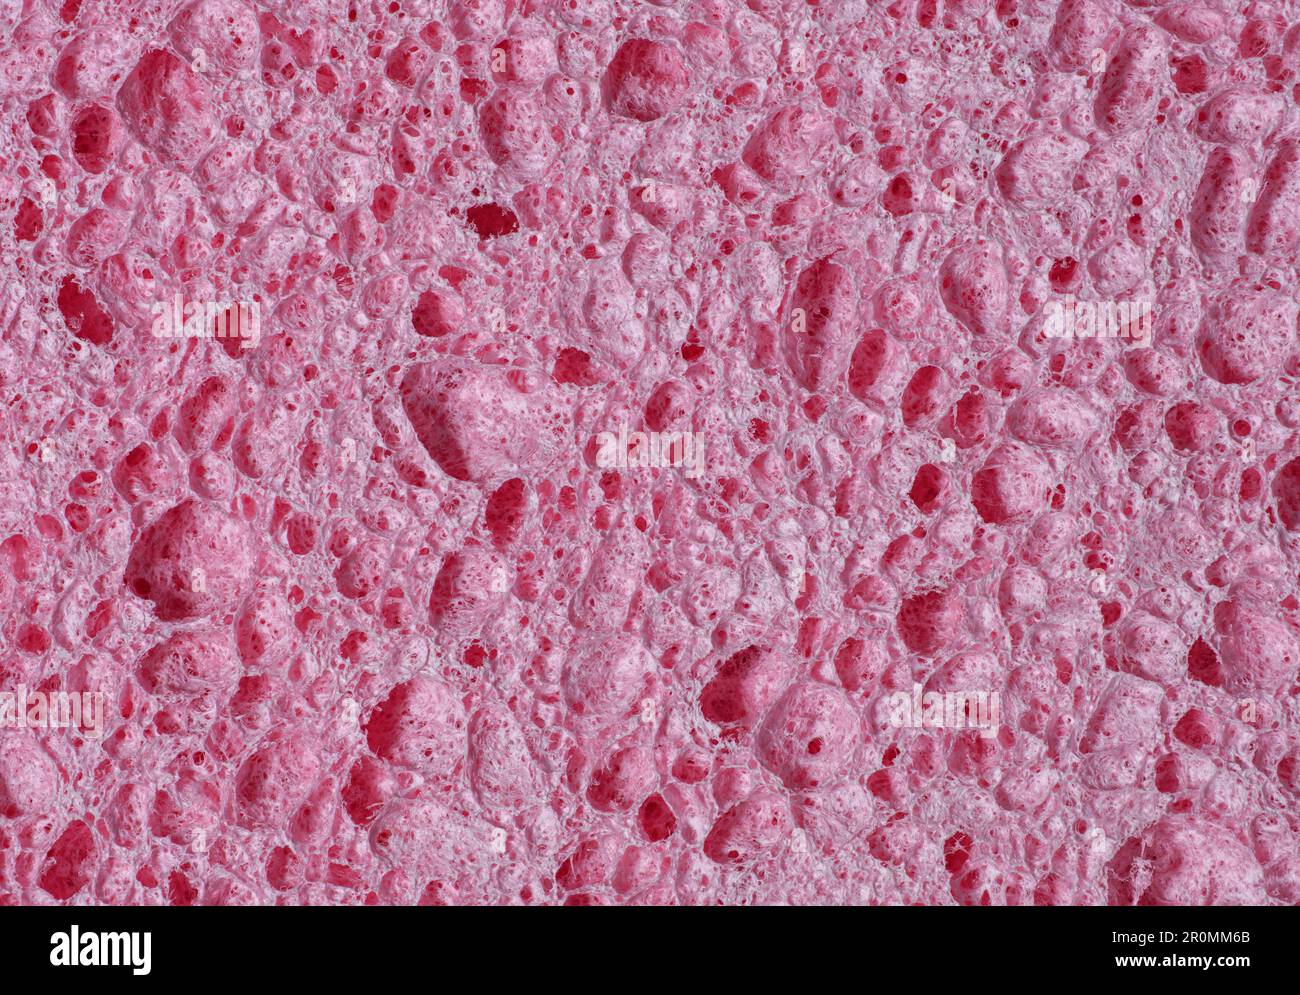 https://c8.alamy.com/comp/2R0MM6B/texture-of-a-porous-pink-sponge-in-close-up-as-an-abstract-background-2R0MM6B.jpg